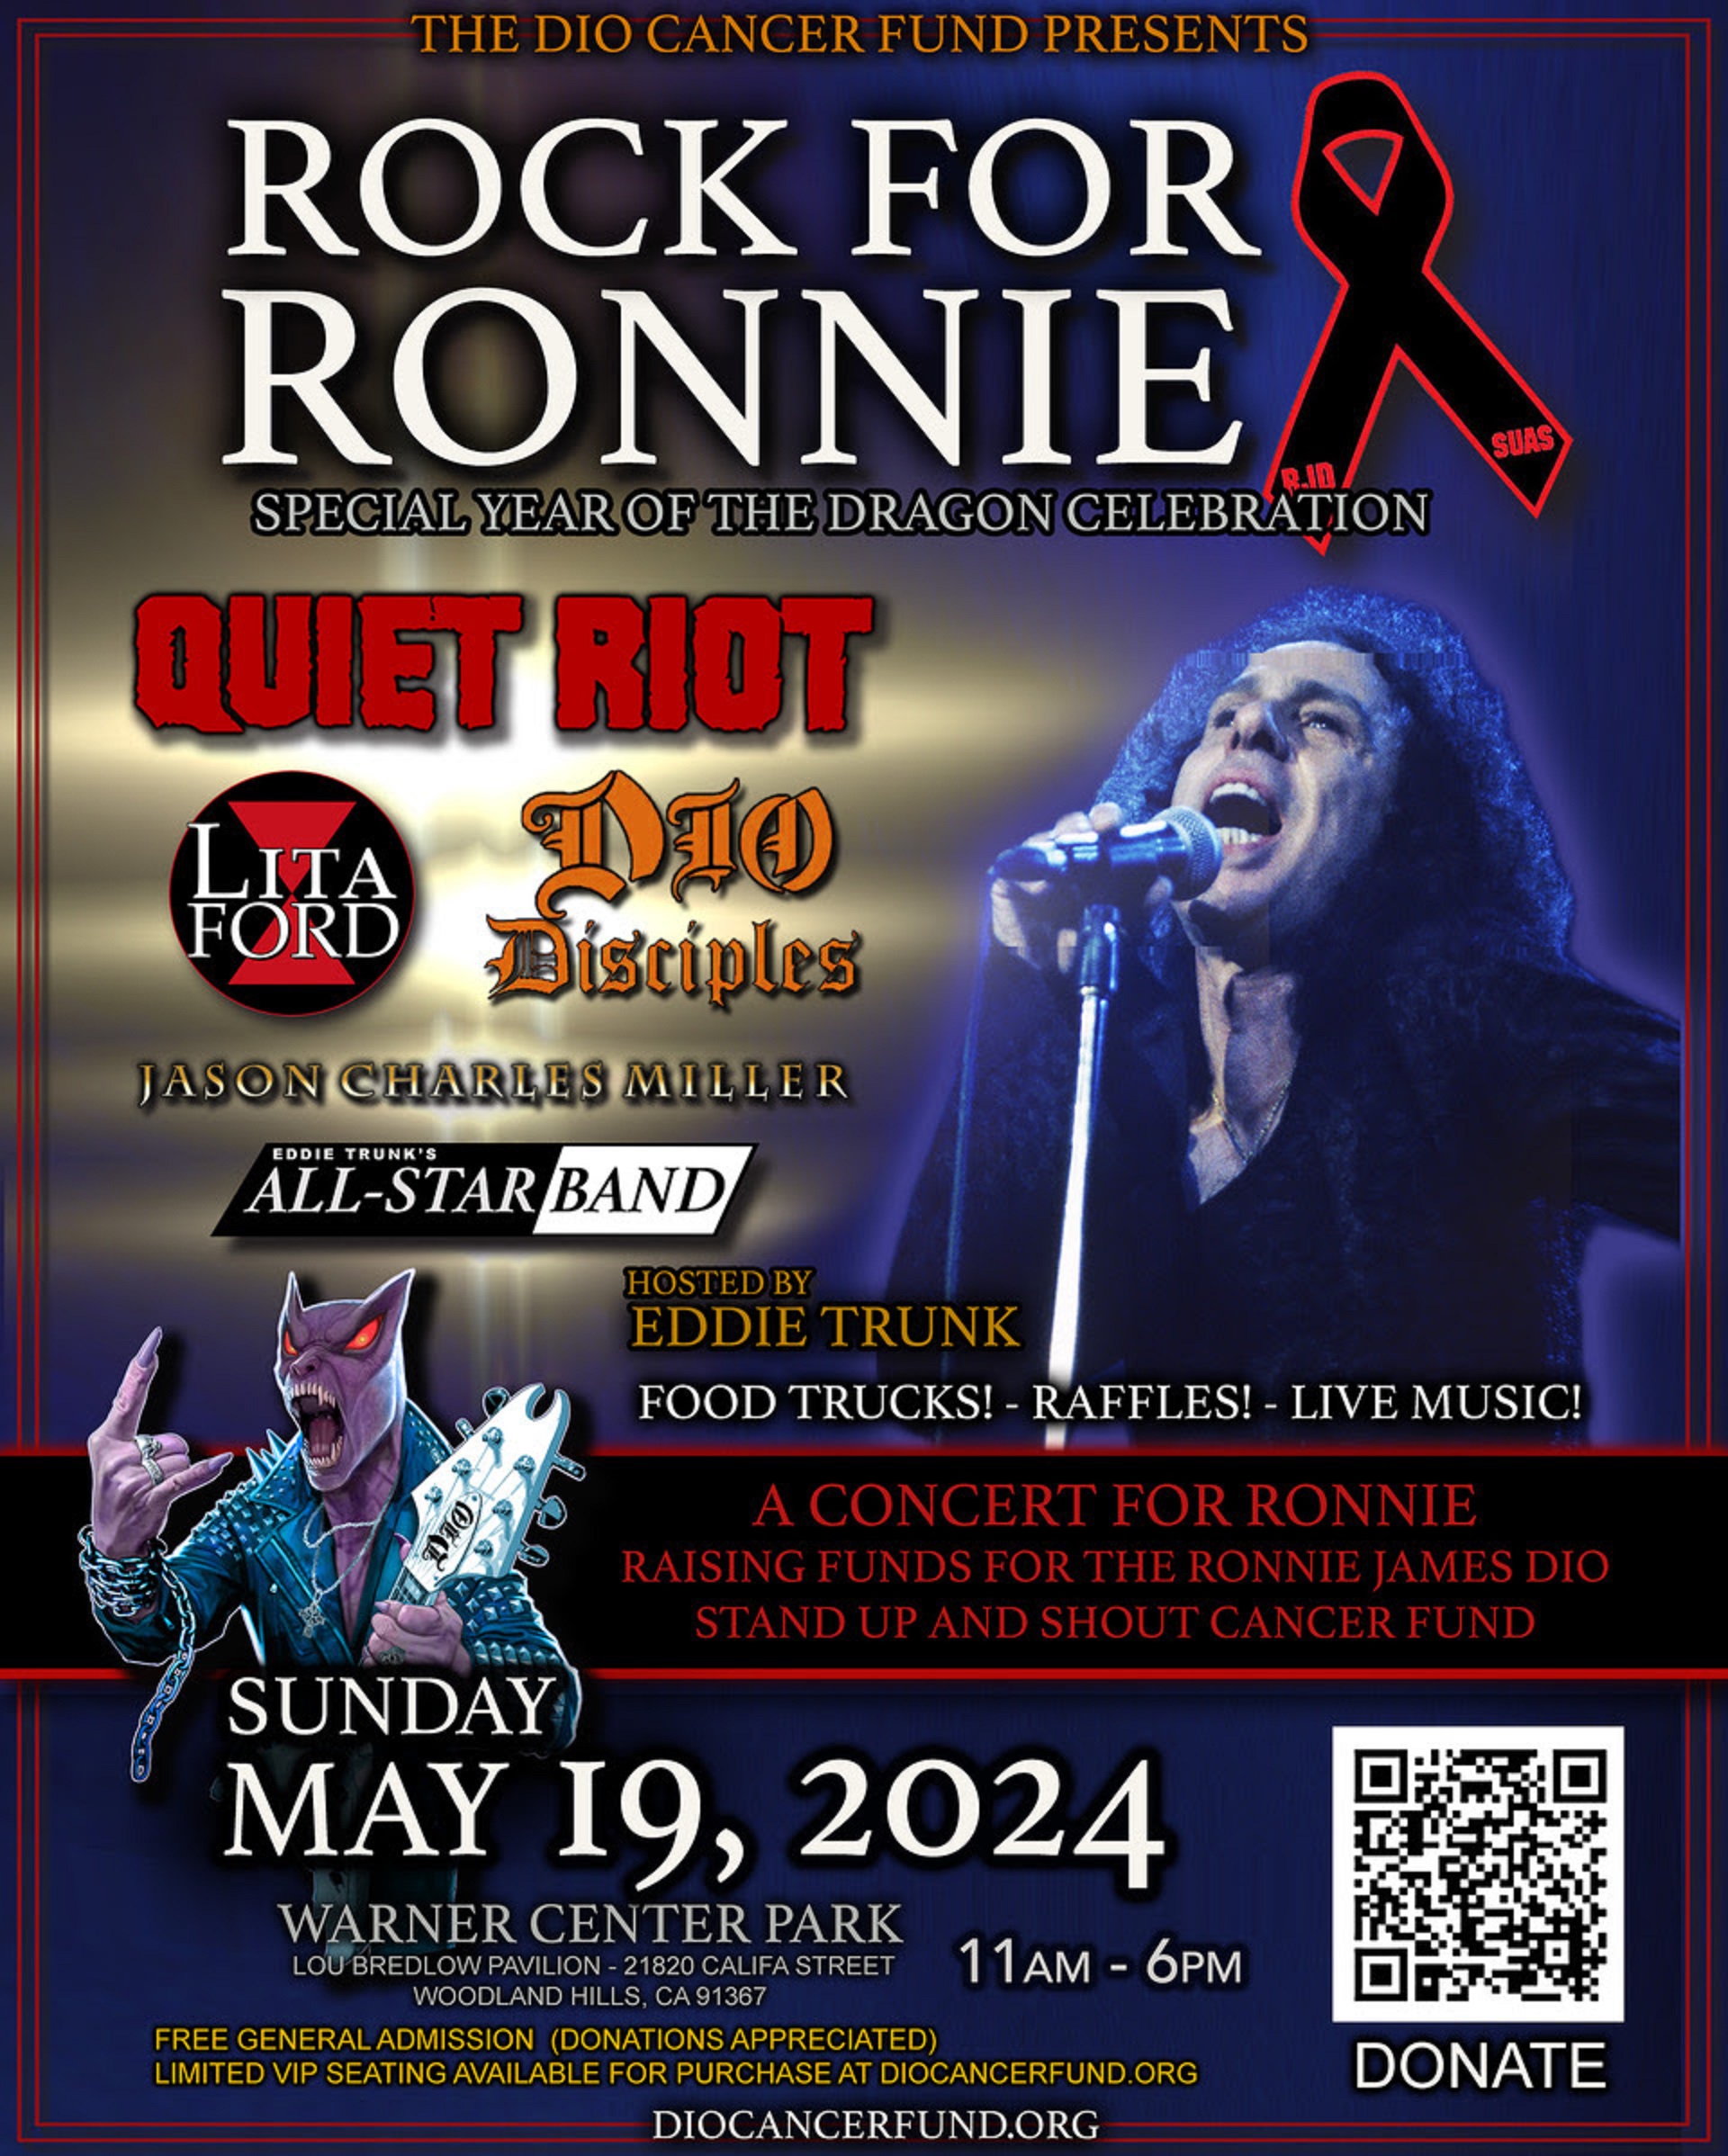 "ROCK FOR RONNIE" Concert Set for May 19 at Warner Center Park to Benefit Dio Cancer Fund